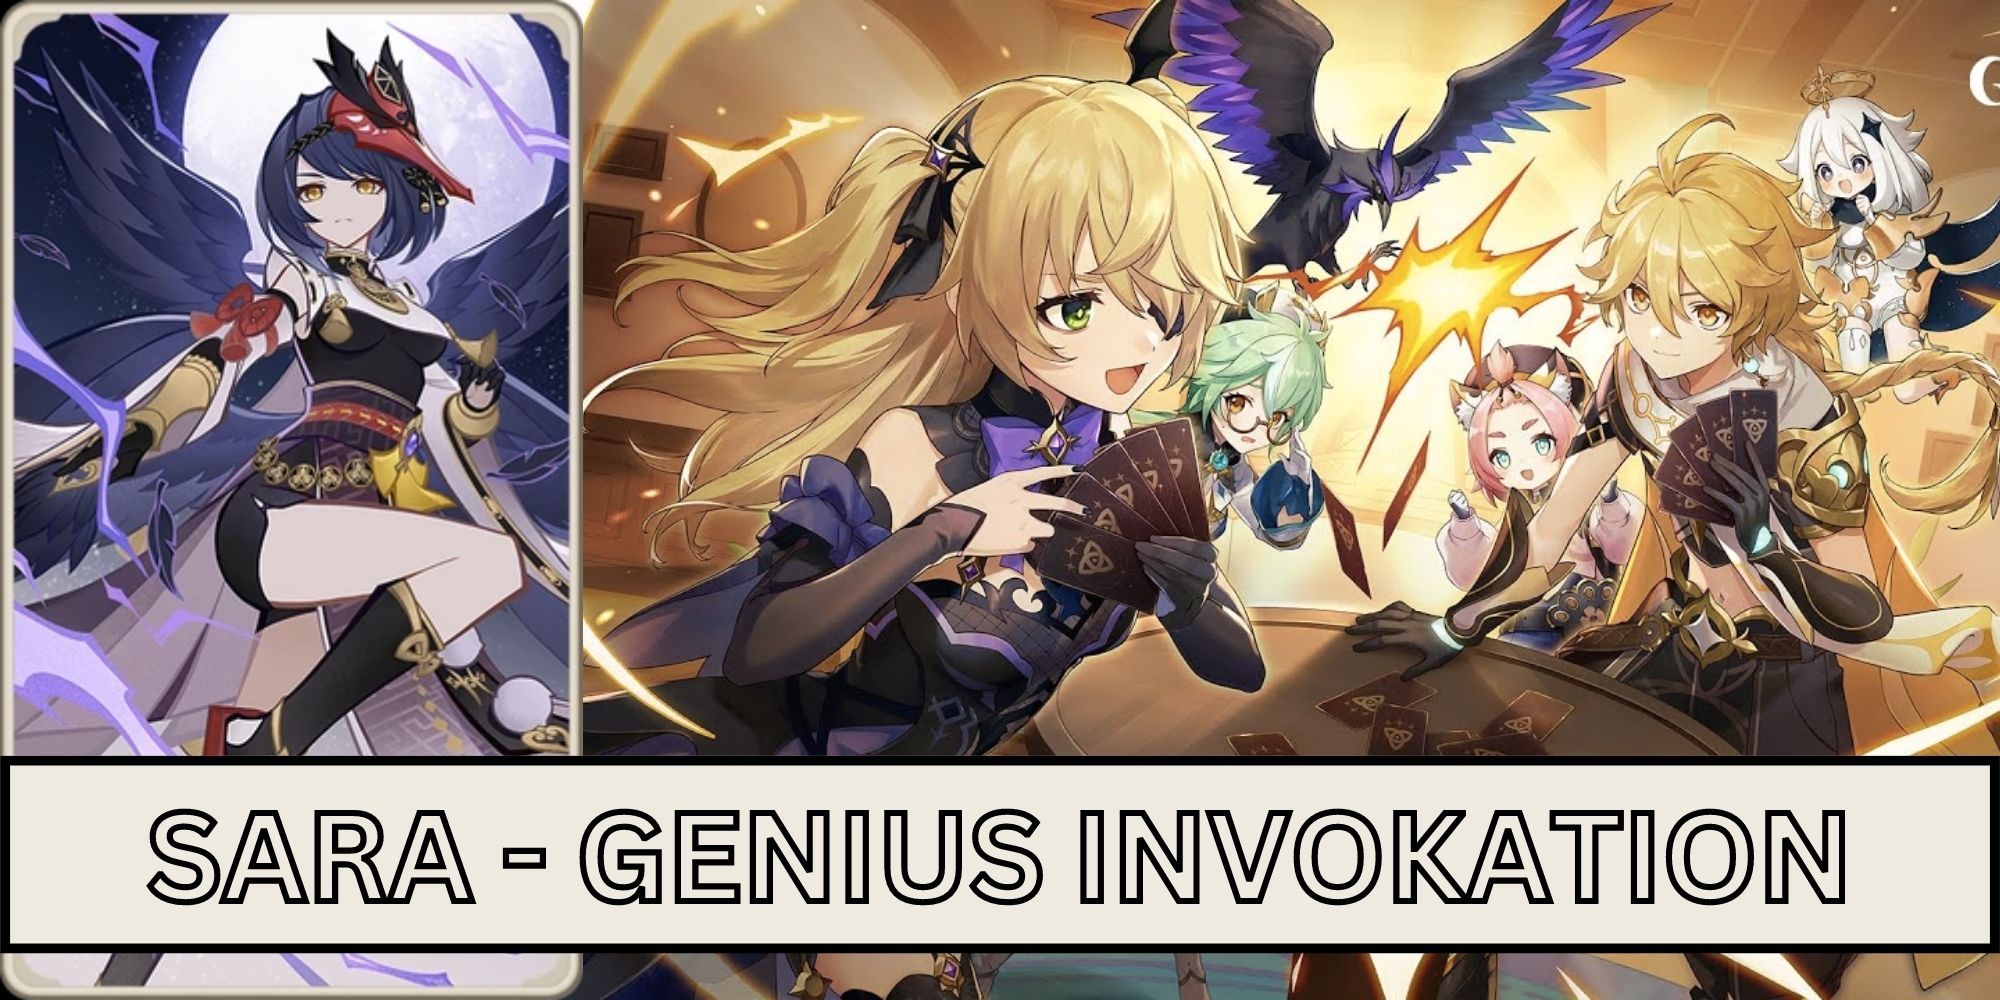 An Introduction to Genius Invokation TCG - New Genshin Impact Card Game